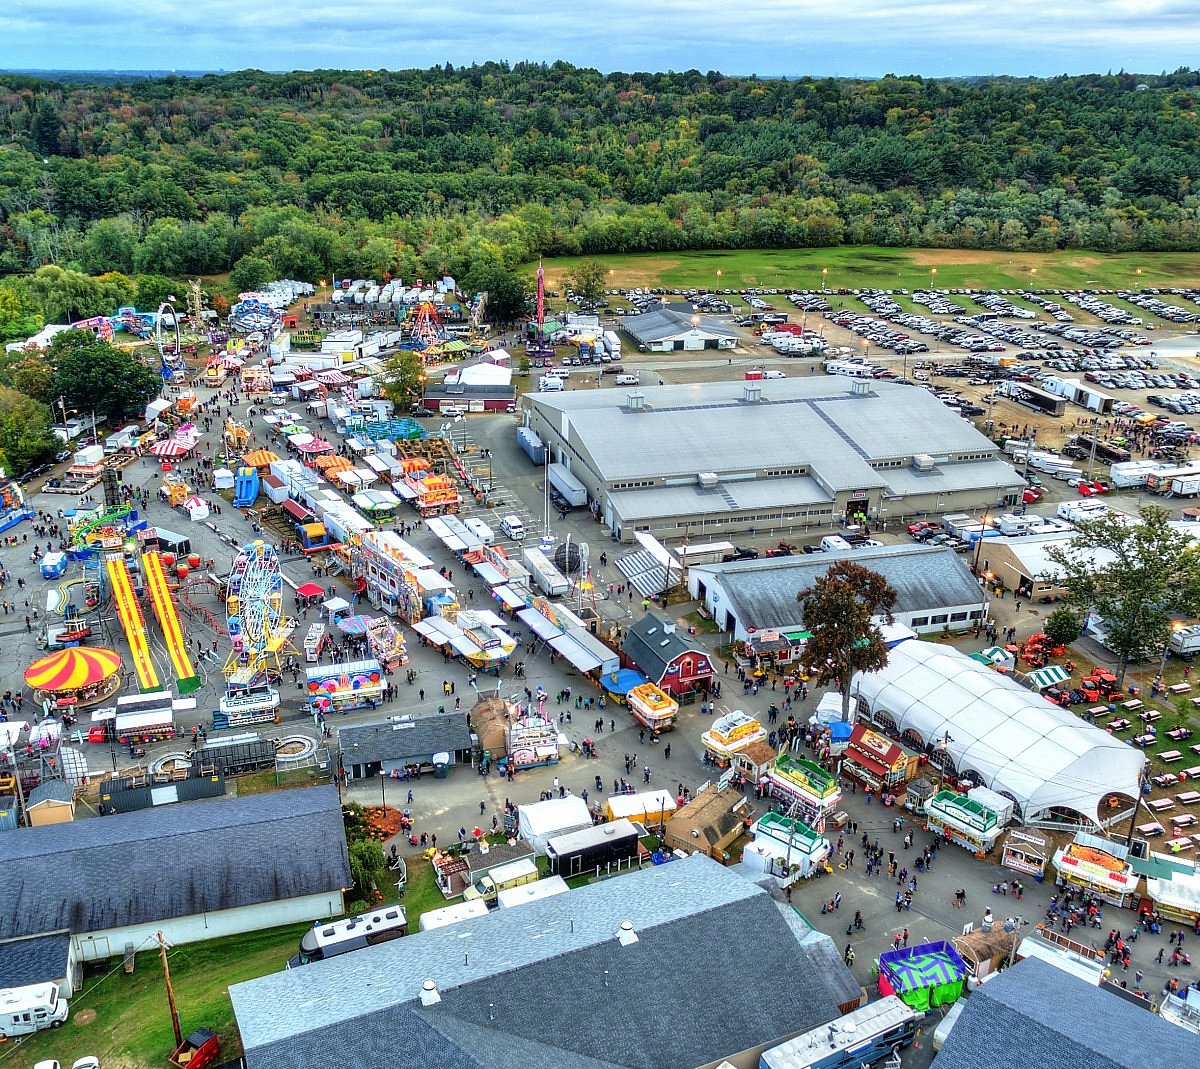 TOPSFIELD FAIR All You Need to Know BEFORE You Go